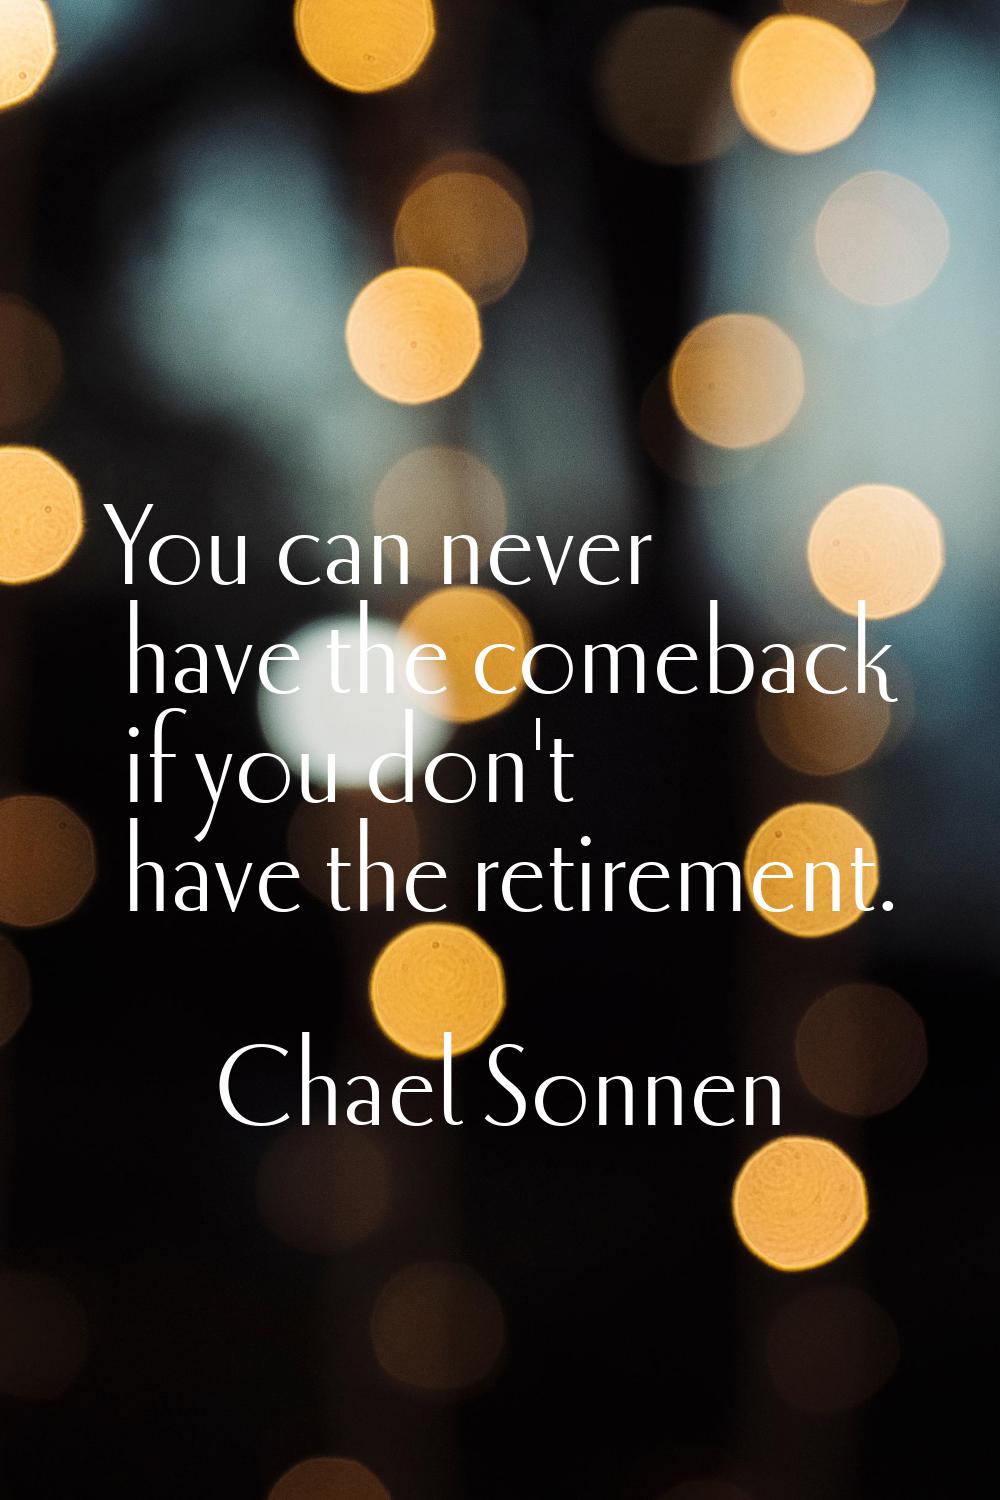 You can never have the comeback if you don't have the retirement.